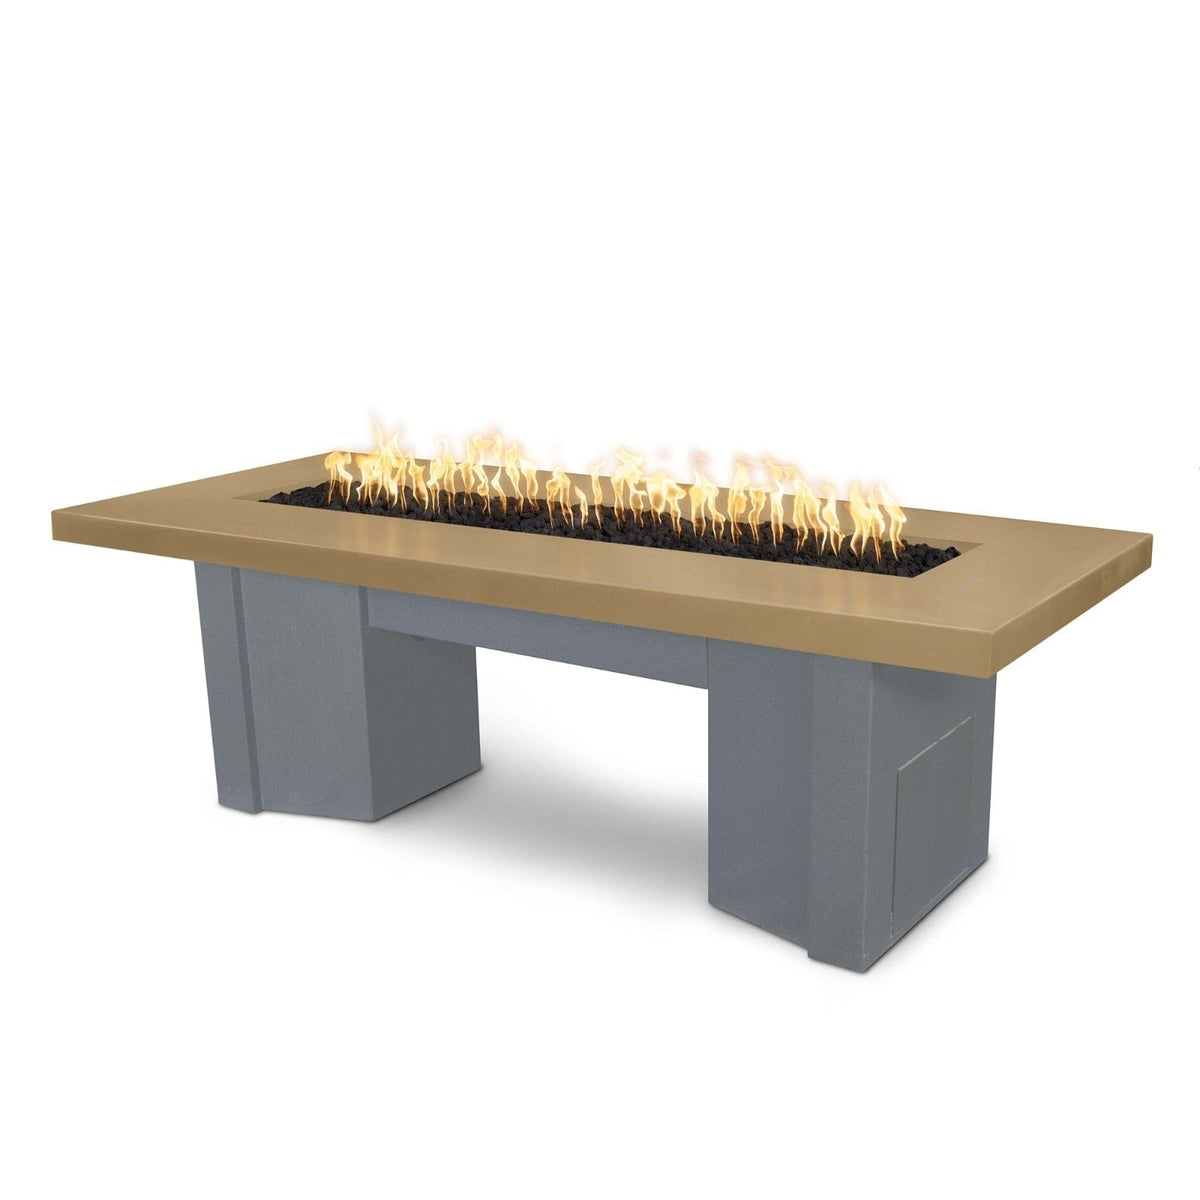 The Outdoor Plus Fire Features Brown (-BRN) / Gray Powder Coated Steel (-GRY) The Outdoor Plus 60&quot; Alameda Fire Table Smooth Concrete in Liquid Propane - Match Lit with Flame Sense System / OPT-ALMGFRC60FSML-LP